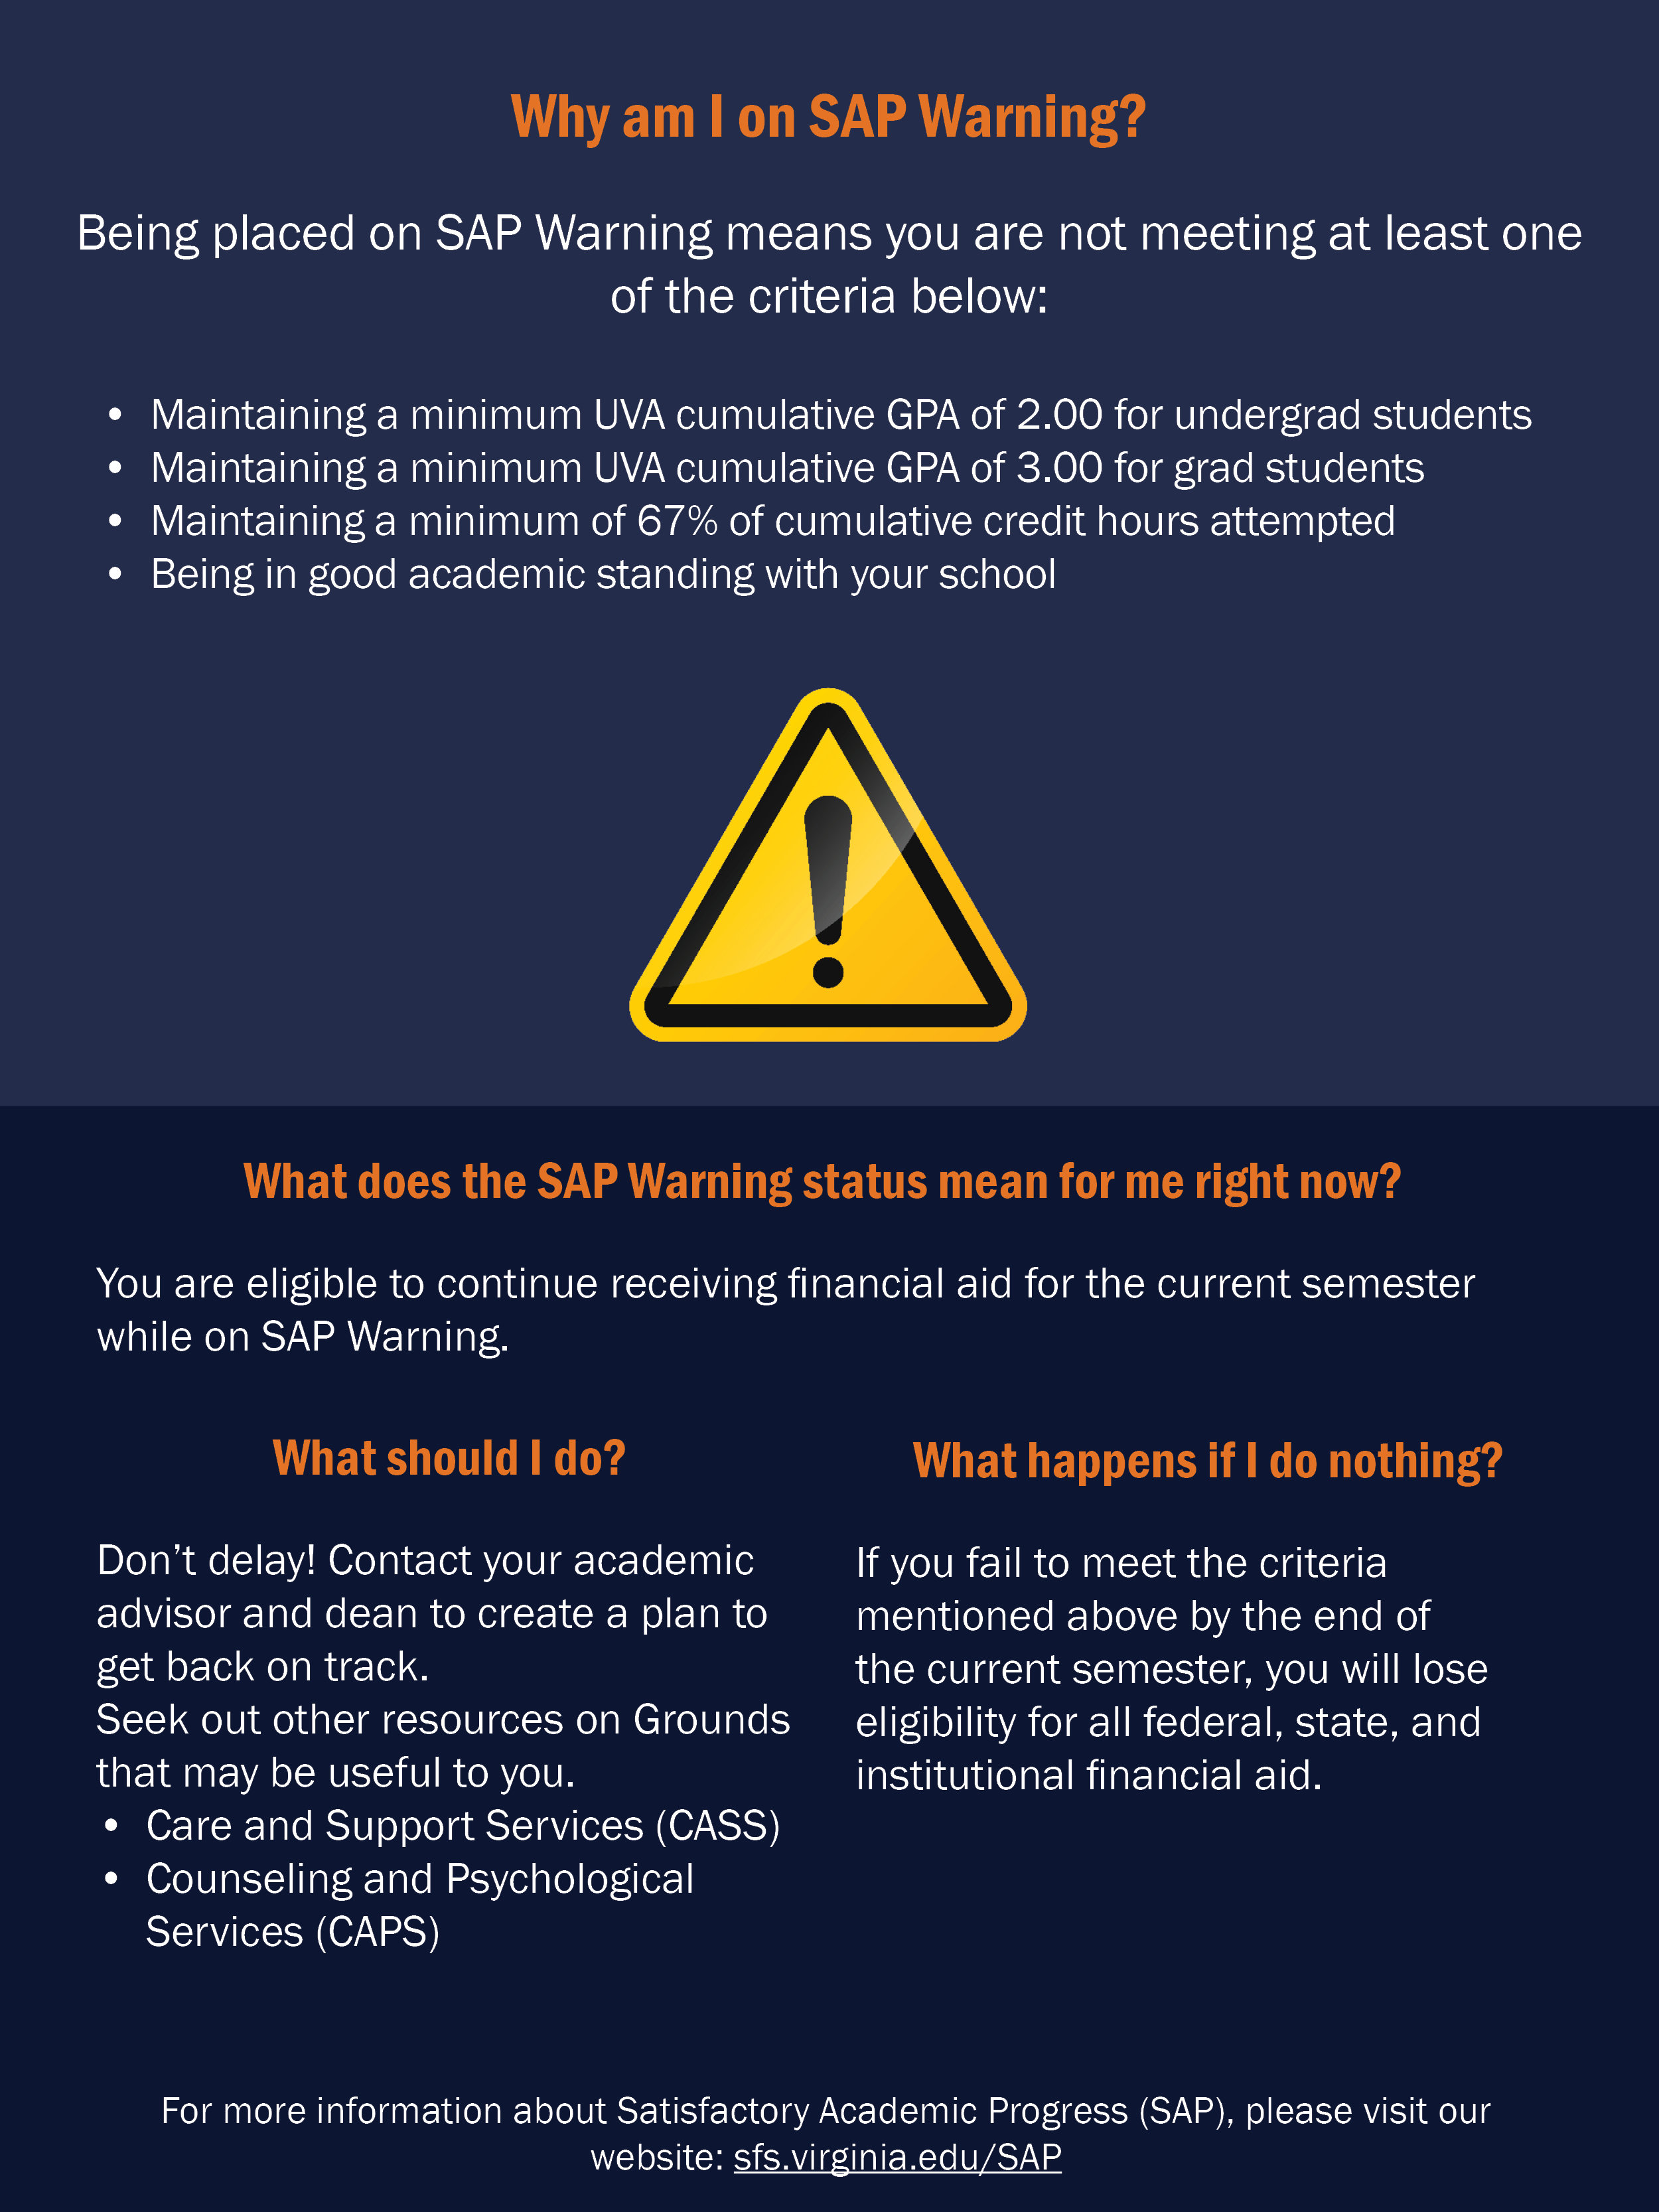 Infographic about SAP warnings, resources, and what to do